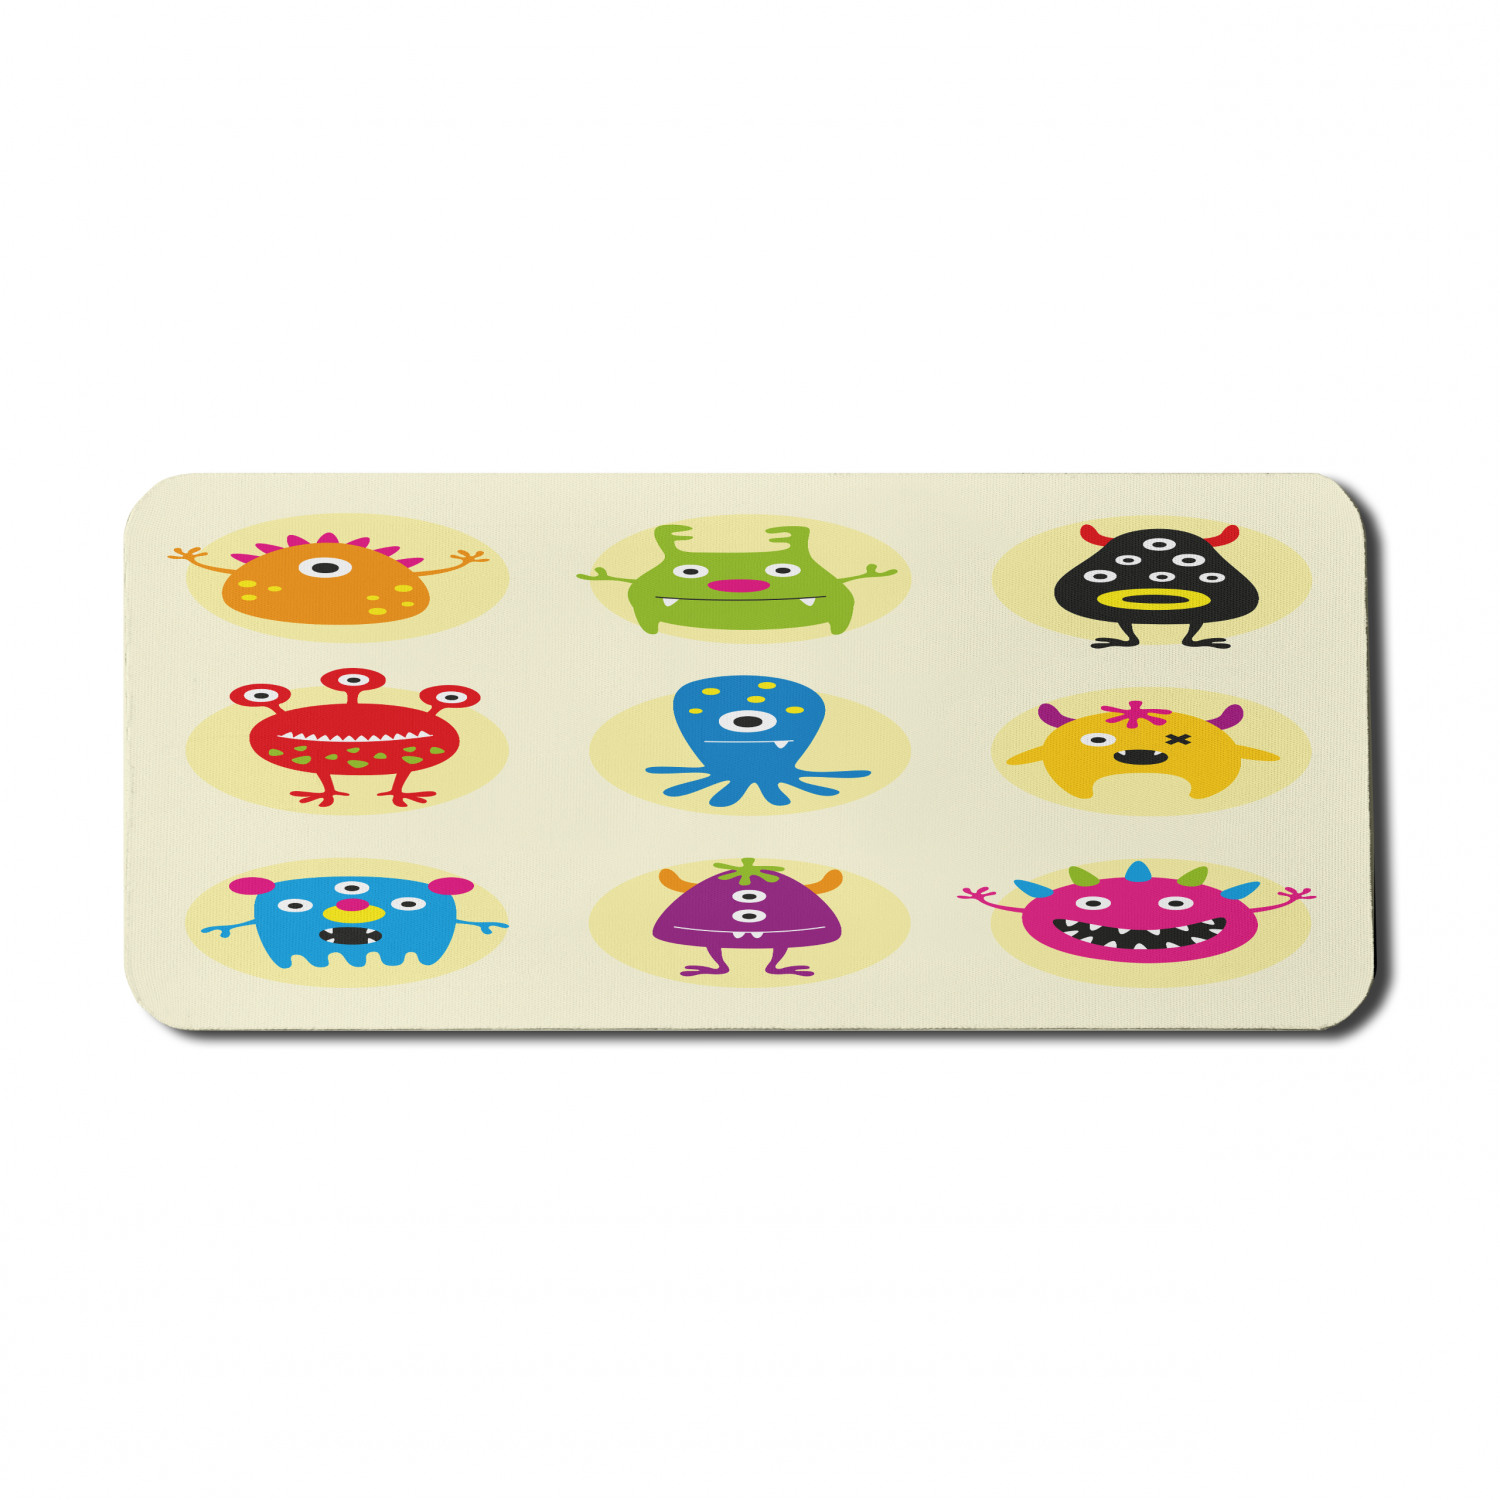 Alien Computer Mouse Pad, Colorful Monsters Extraterrestrial Beings Illustration Childish Cartoon Art, Rectangle Non-Slip Rubber Mousepad X-Large, 35" x 15", Cream and Multicolor, by Ambesonne - image 1 of 2